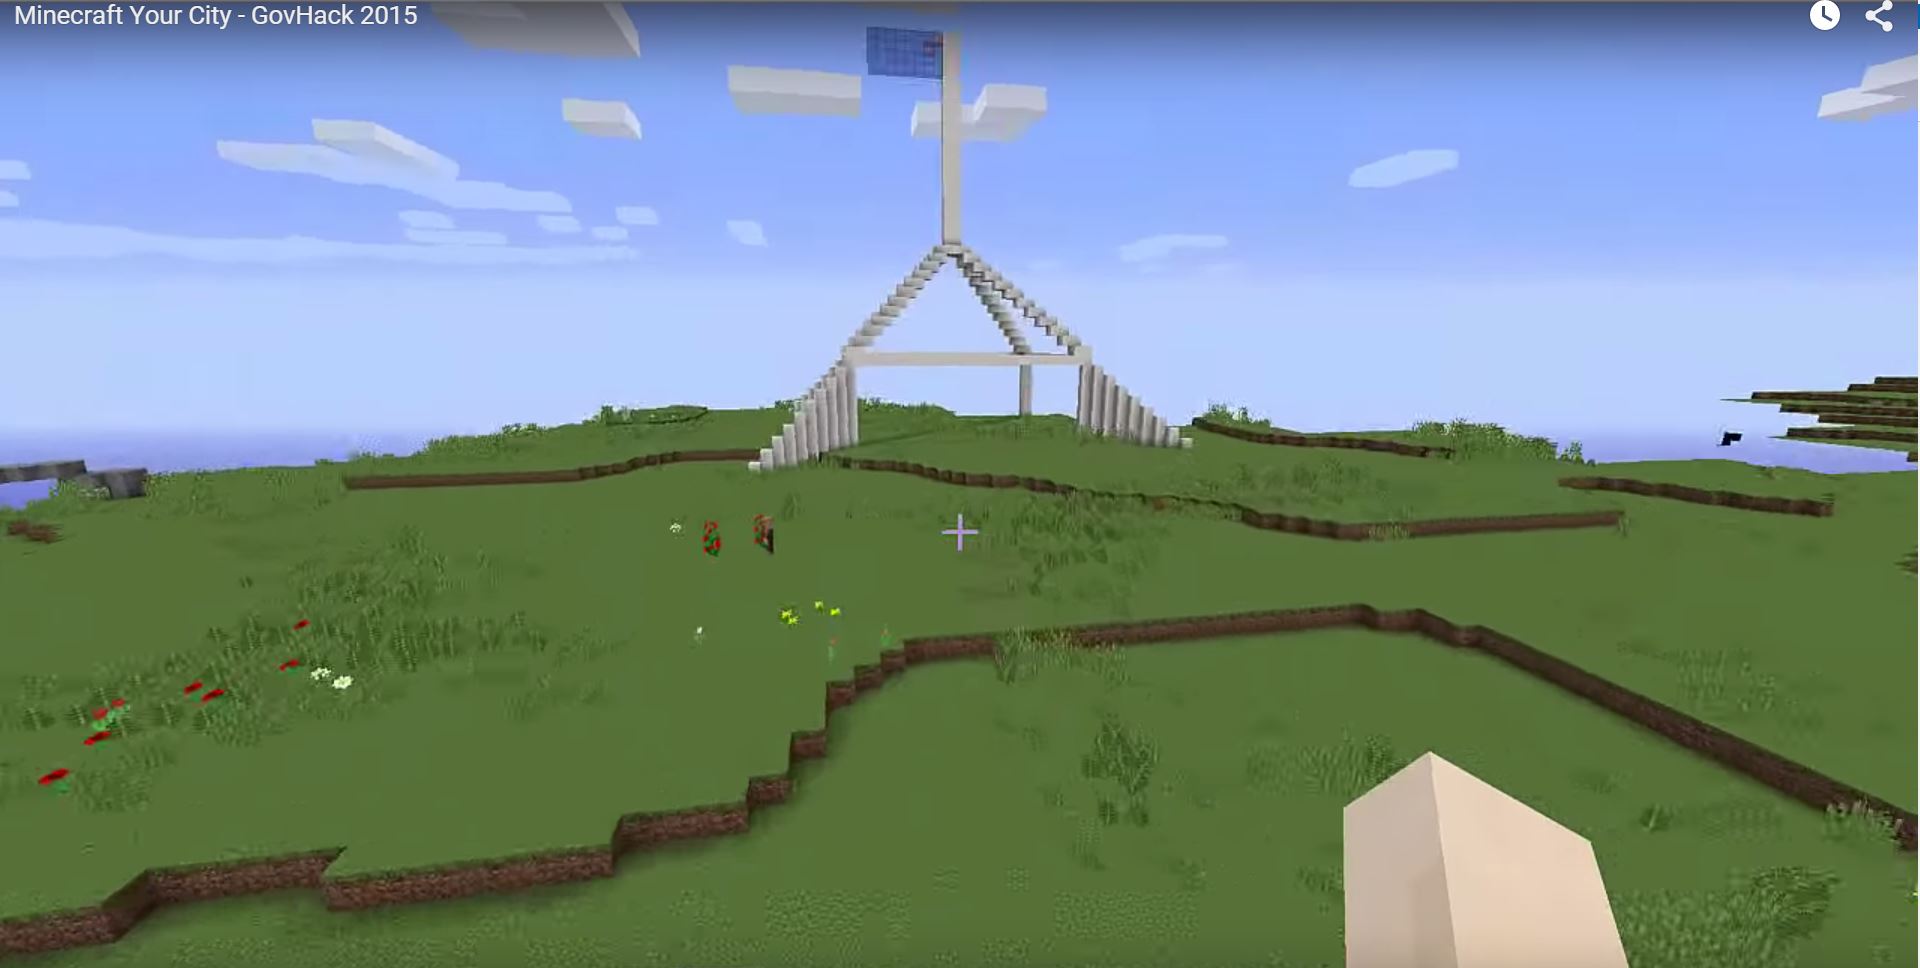 Parliament House, Canberra rendered in Minecraft